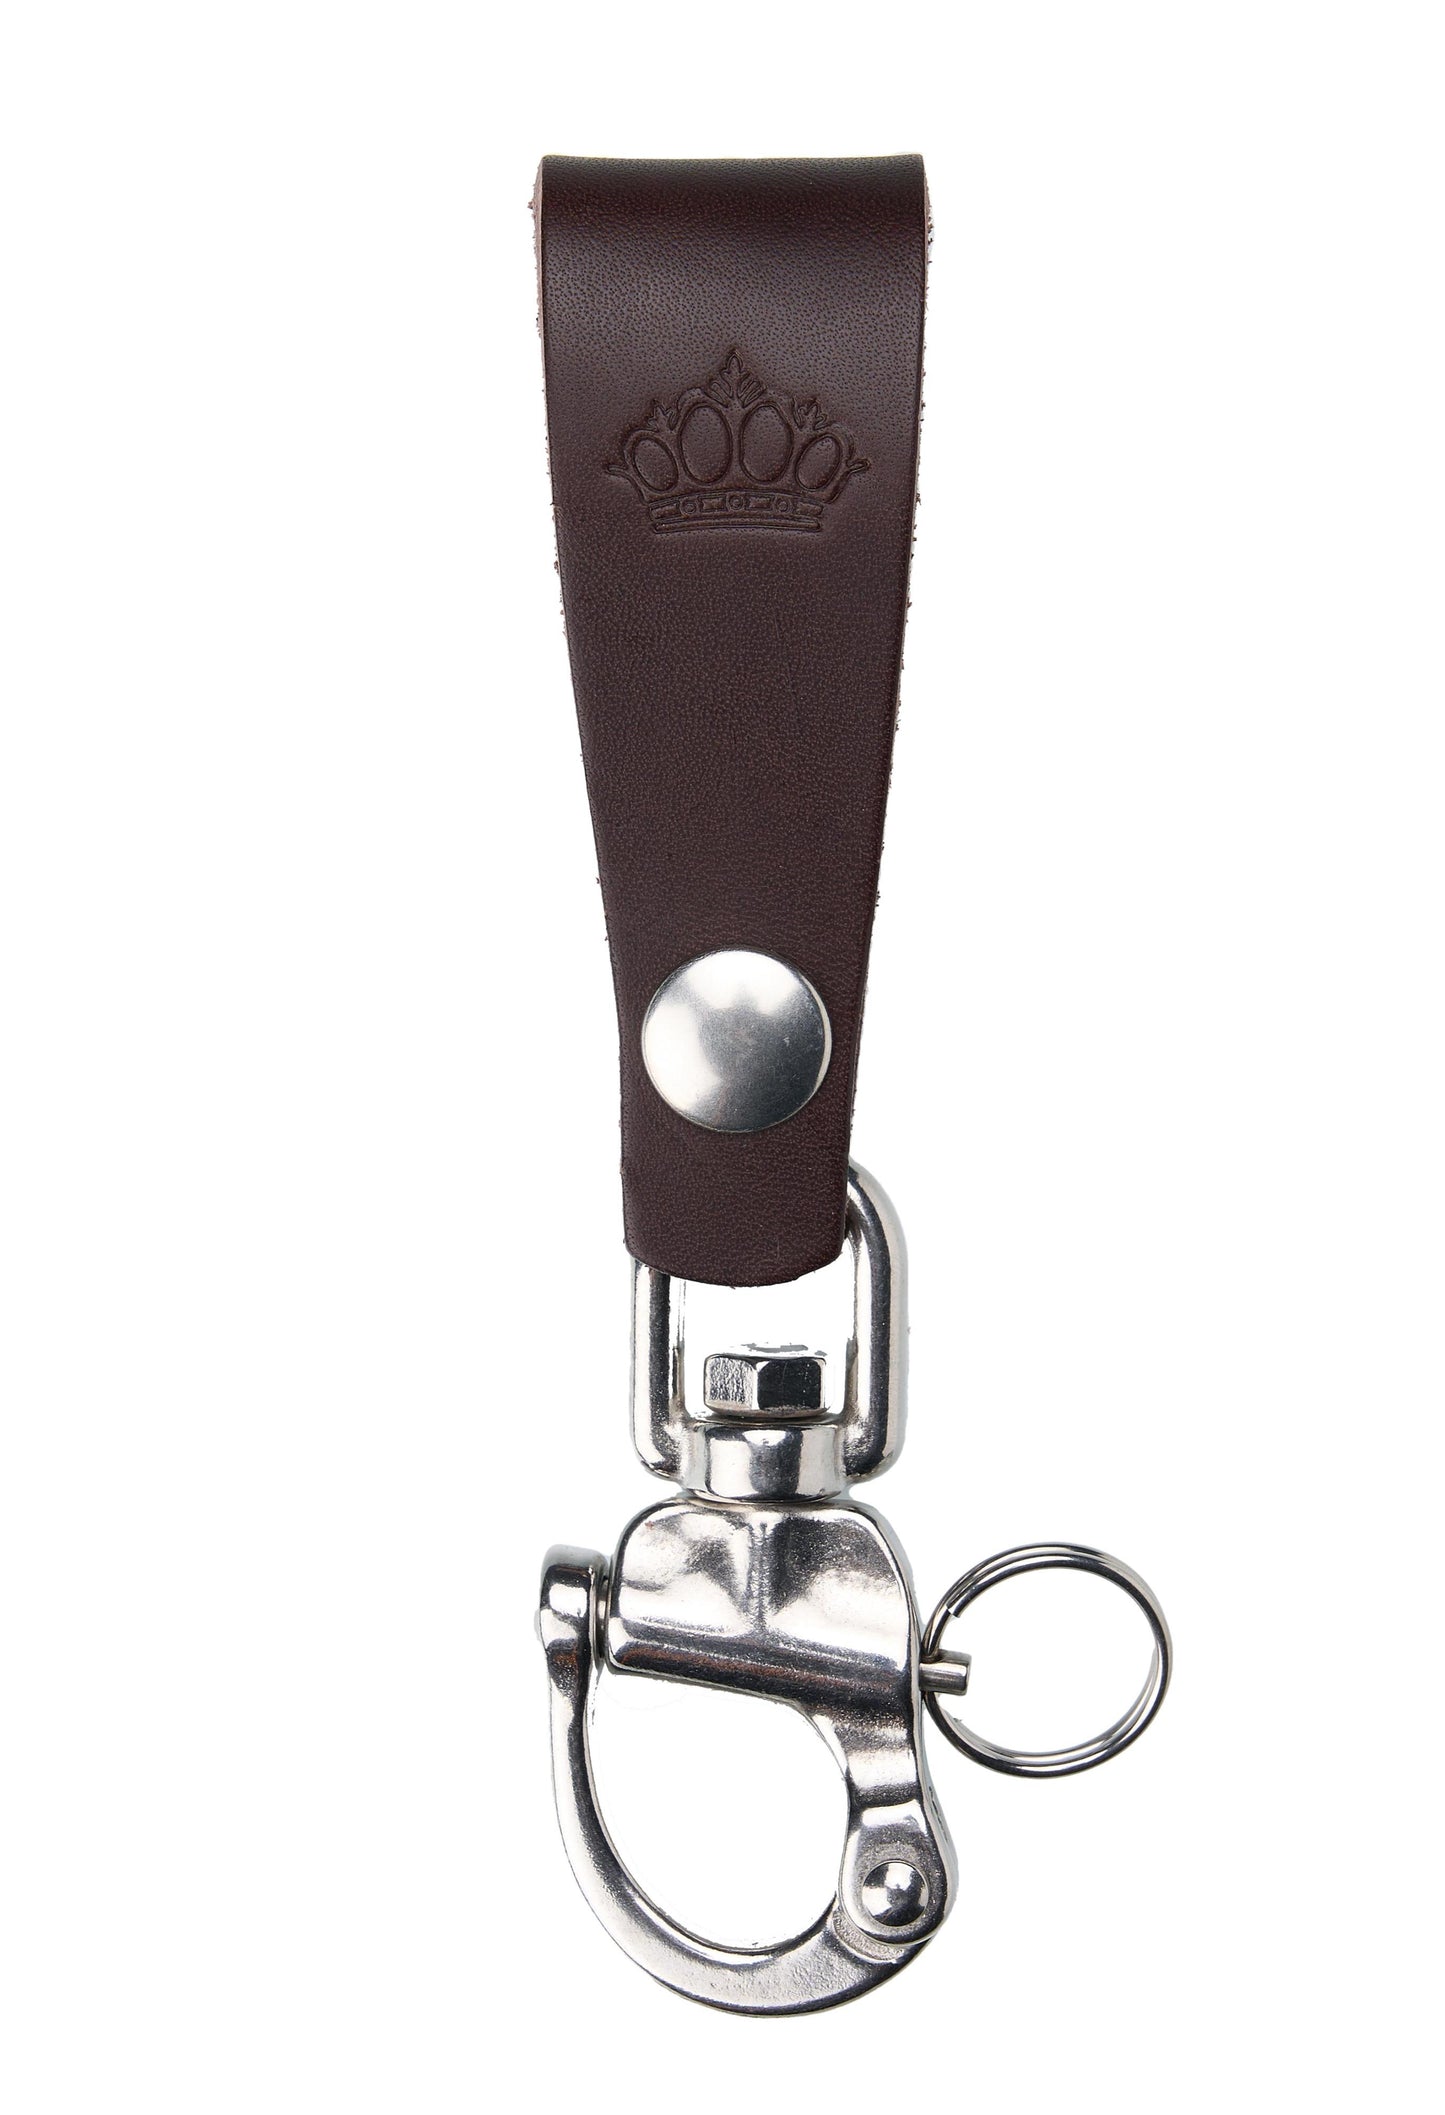 Pike Brothers 1965 Key Hanger Brown